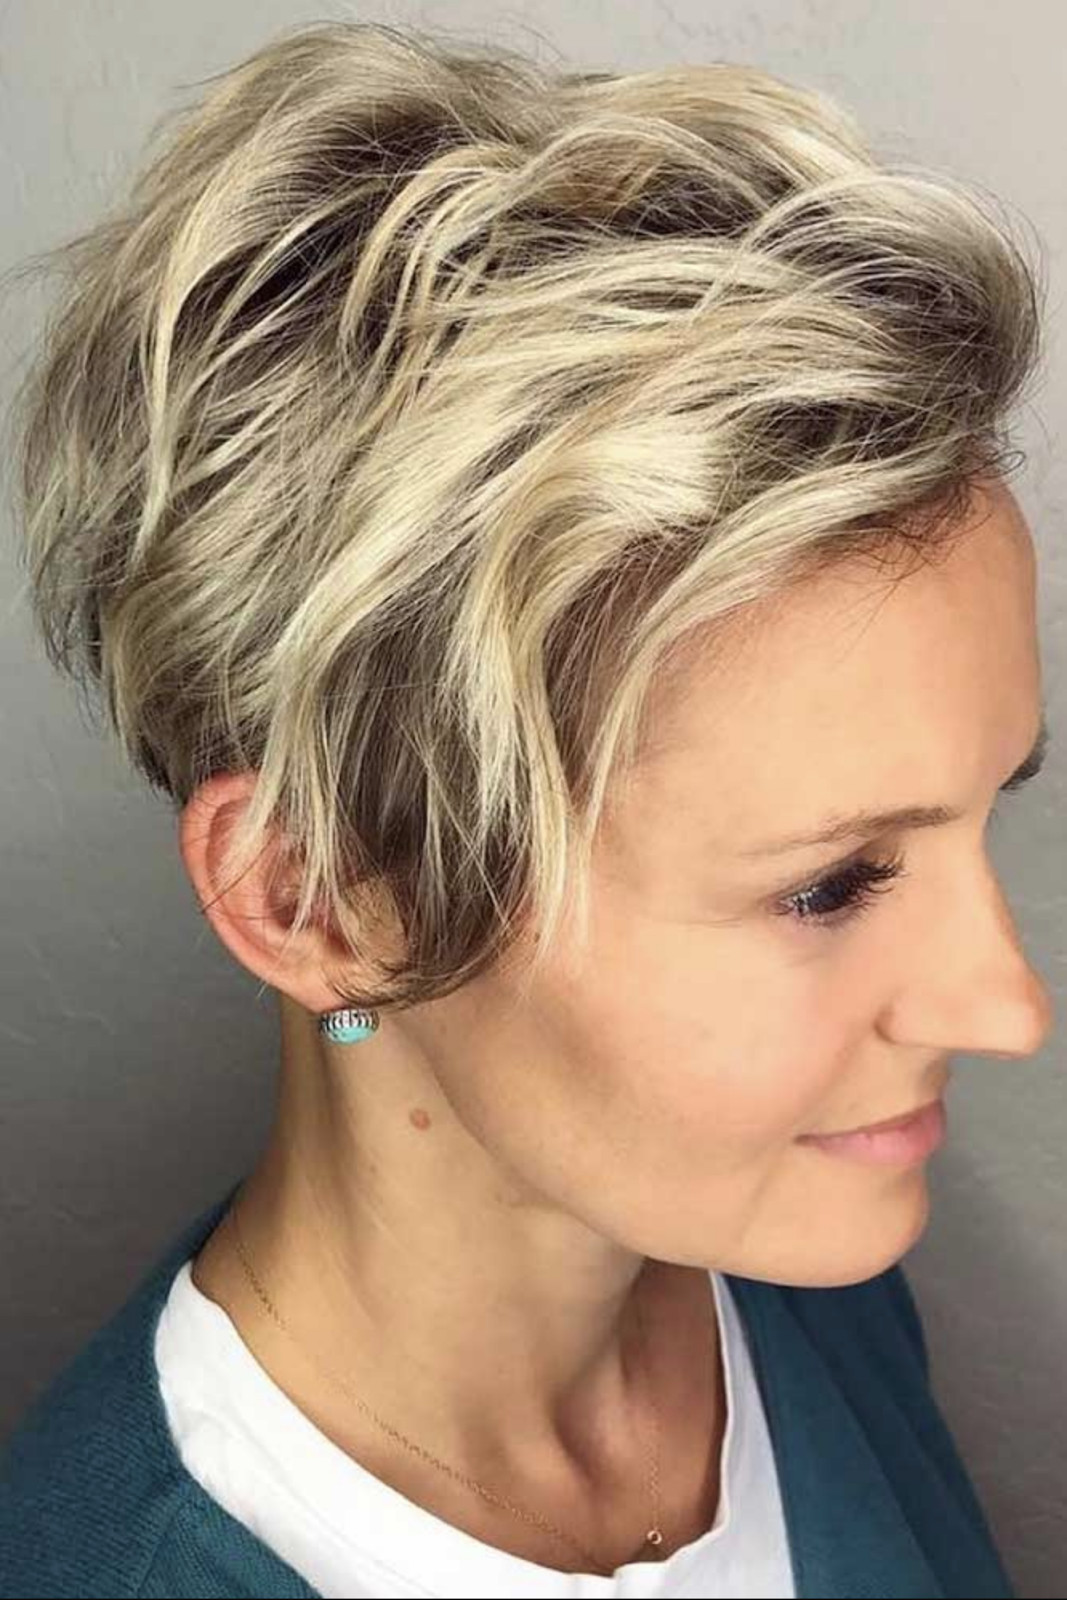 Short Hairstyles For Fine Hair 2020
 2019 2020 Short Hairstyles for Women Over 50 That Are